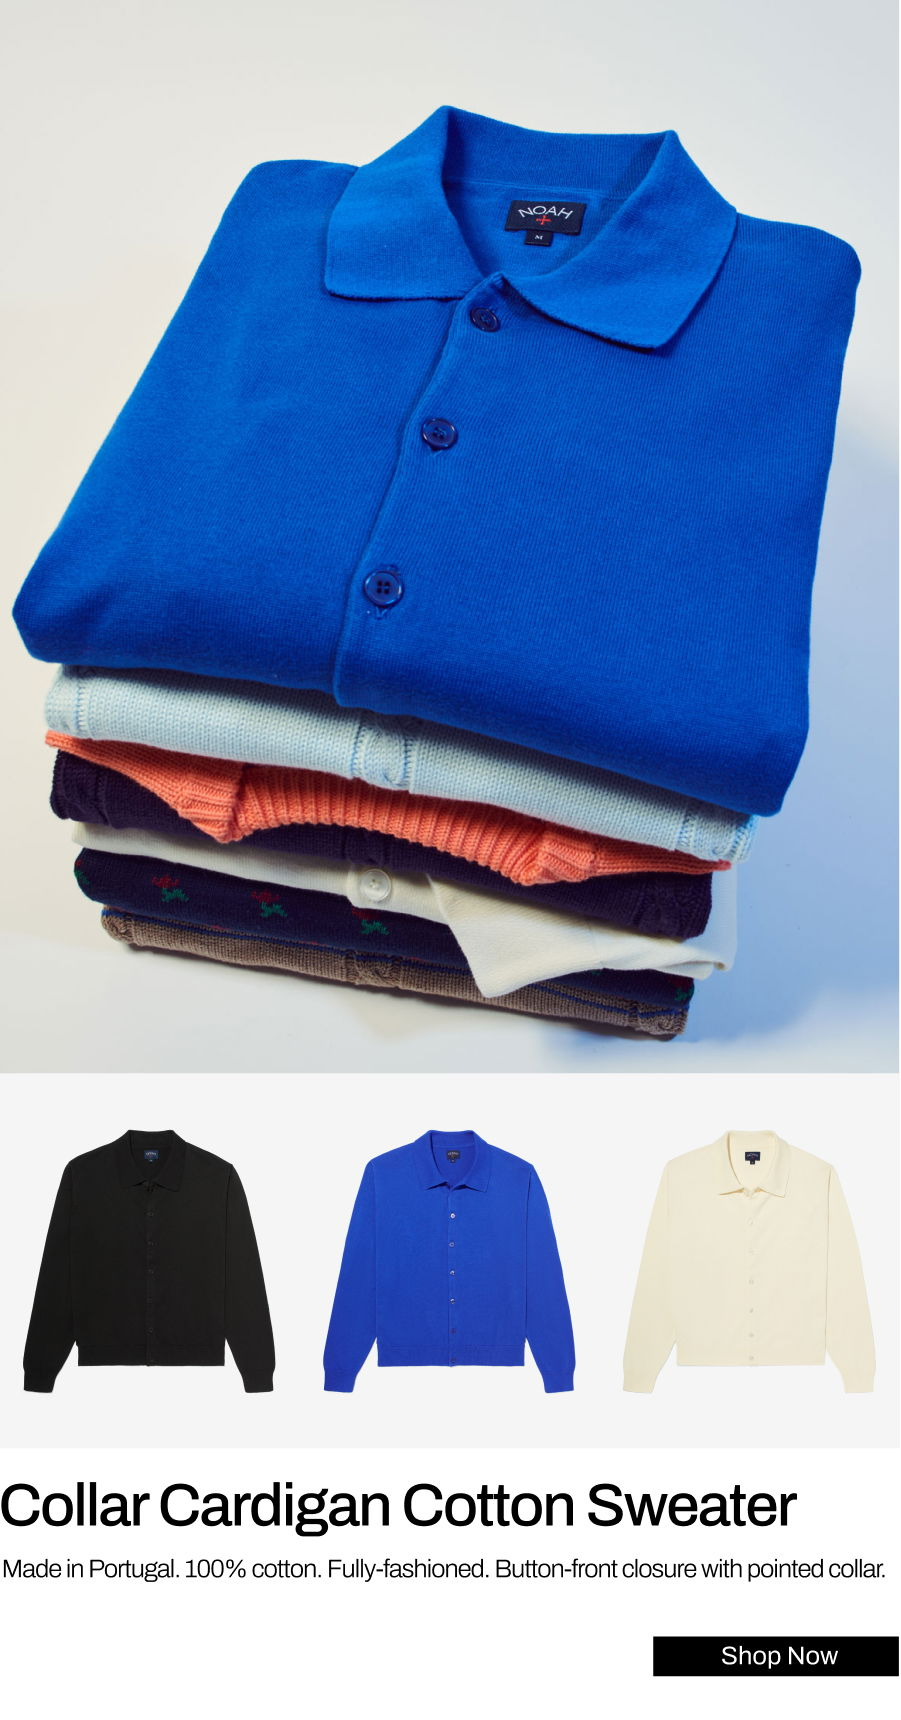 Noah Clothing: Cable Cotton Sweaters, Rose Jacquard, and 30 more